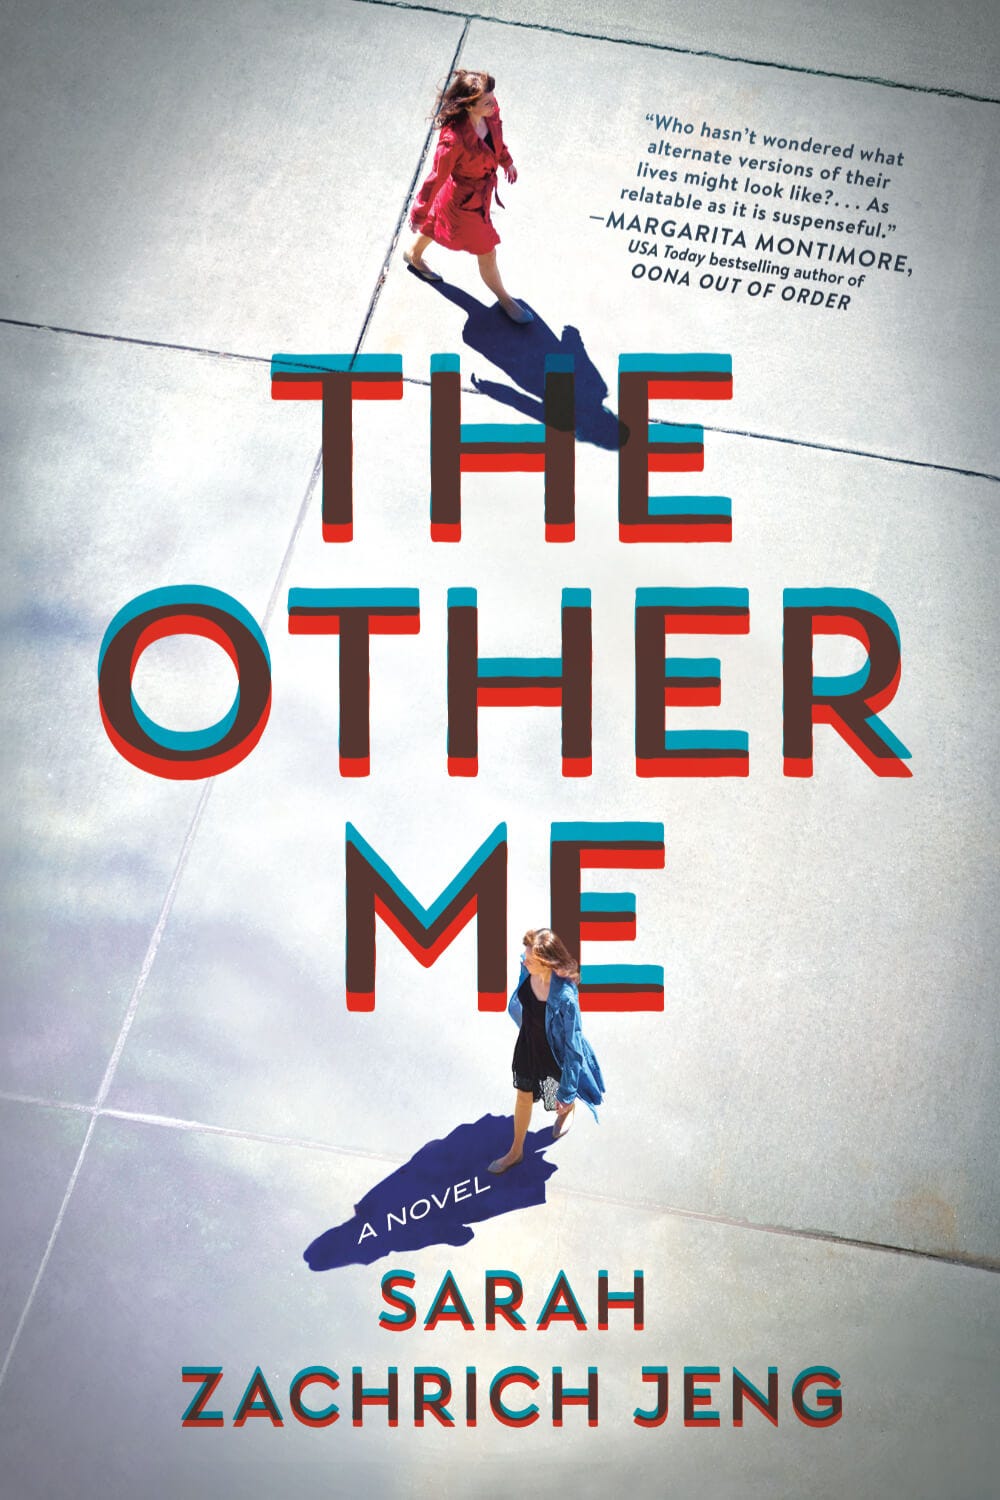 Book cover image for THE OTHER ME by Sarah Zachrich Jeng. The book’s title separates the small figures of two white women, one wearing a red coat and one wearing a blue coat, walking in opposite directions on a concrete surface Their shadows are well defined and they walk with purpose, neutral facial expressions, and seemingly no awareness of each other. In the top right corner is this blurb from Margarita Montimore, USA Today bestselling author of OONA OUT OF ORDER: “Who hasn’t wondered what alternate versions of their lives might look like? … As relatable as it is suspenseful.”